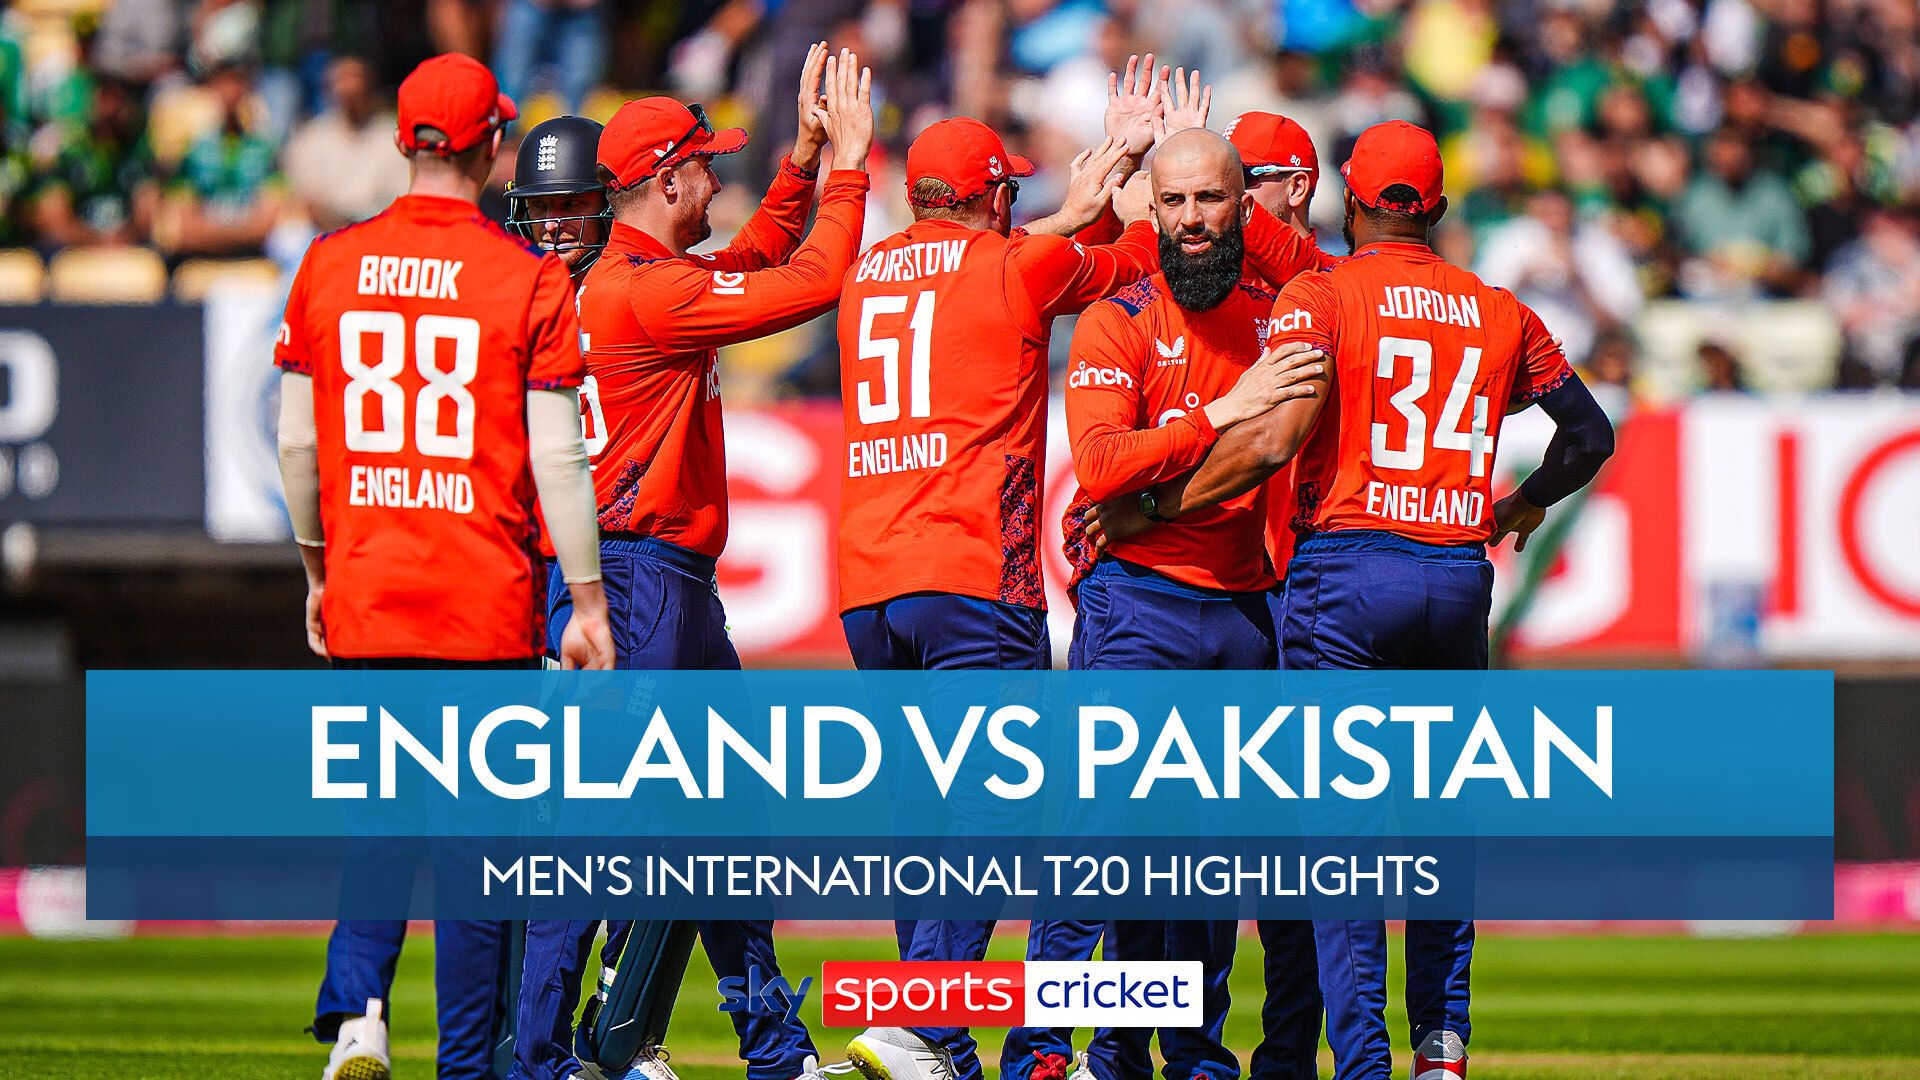 Highlights: England get off the mark in T20 series with Pakistan